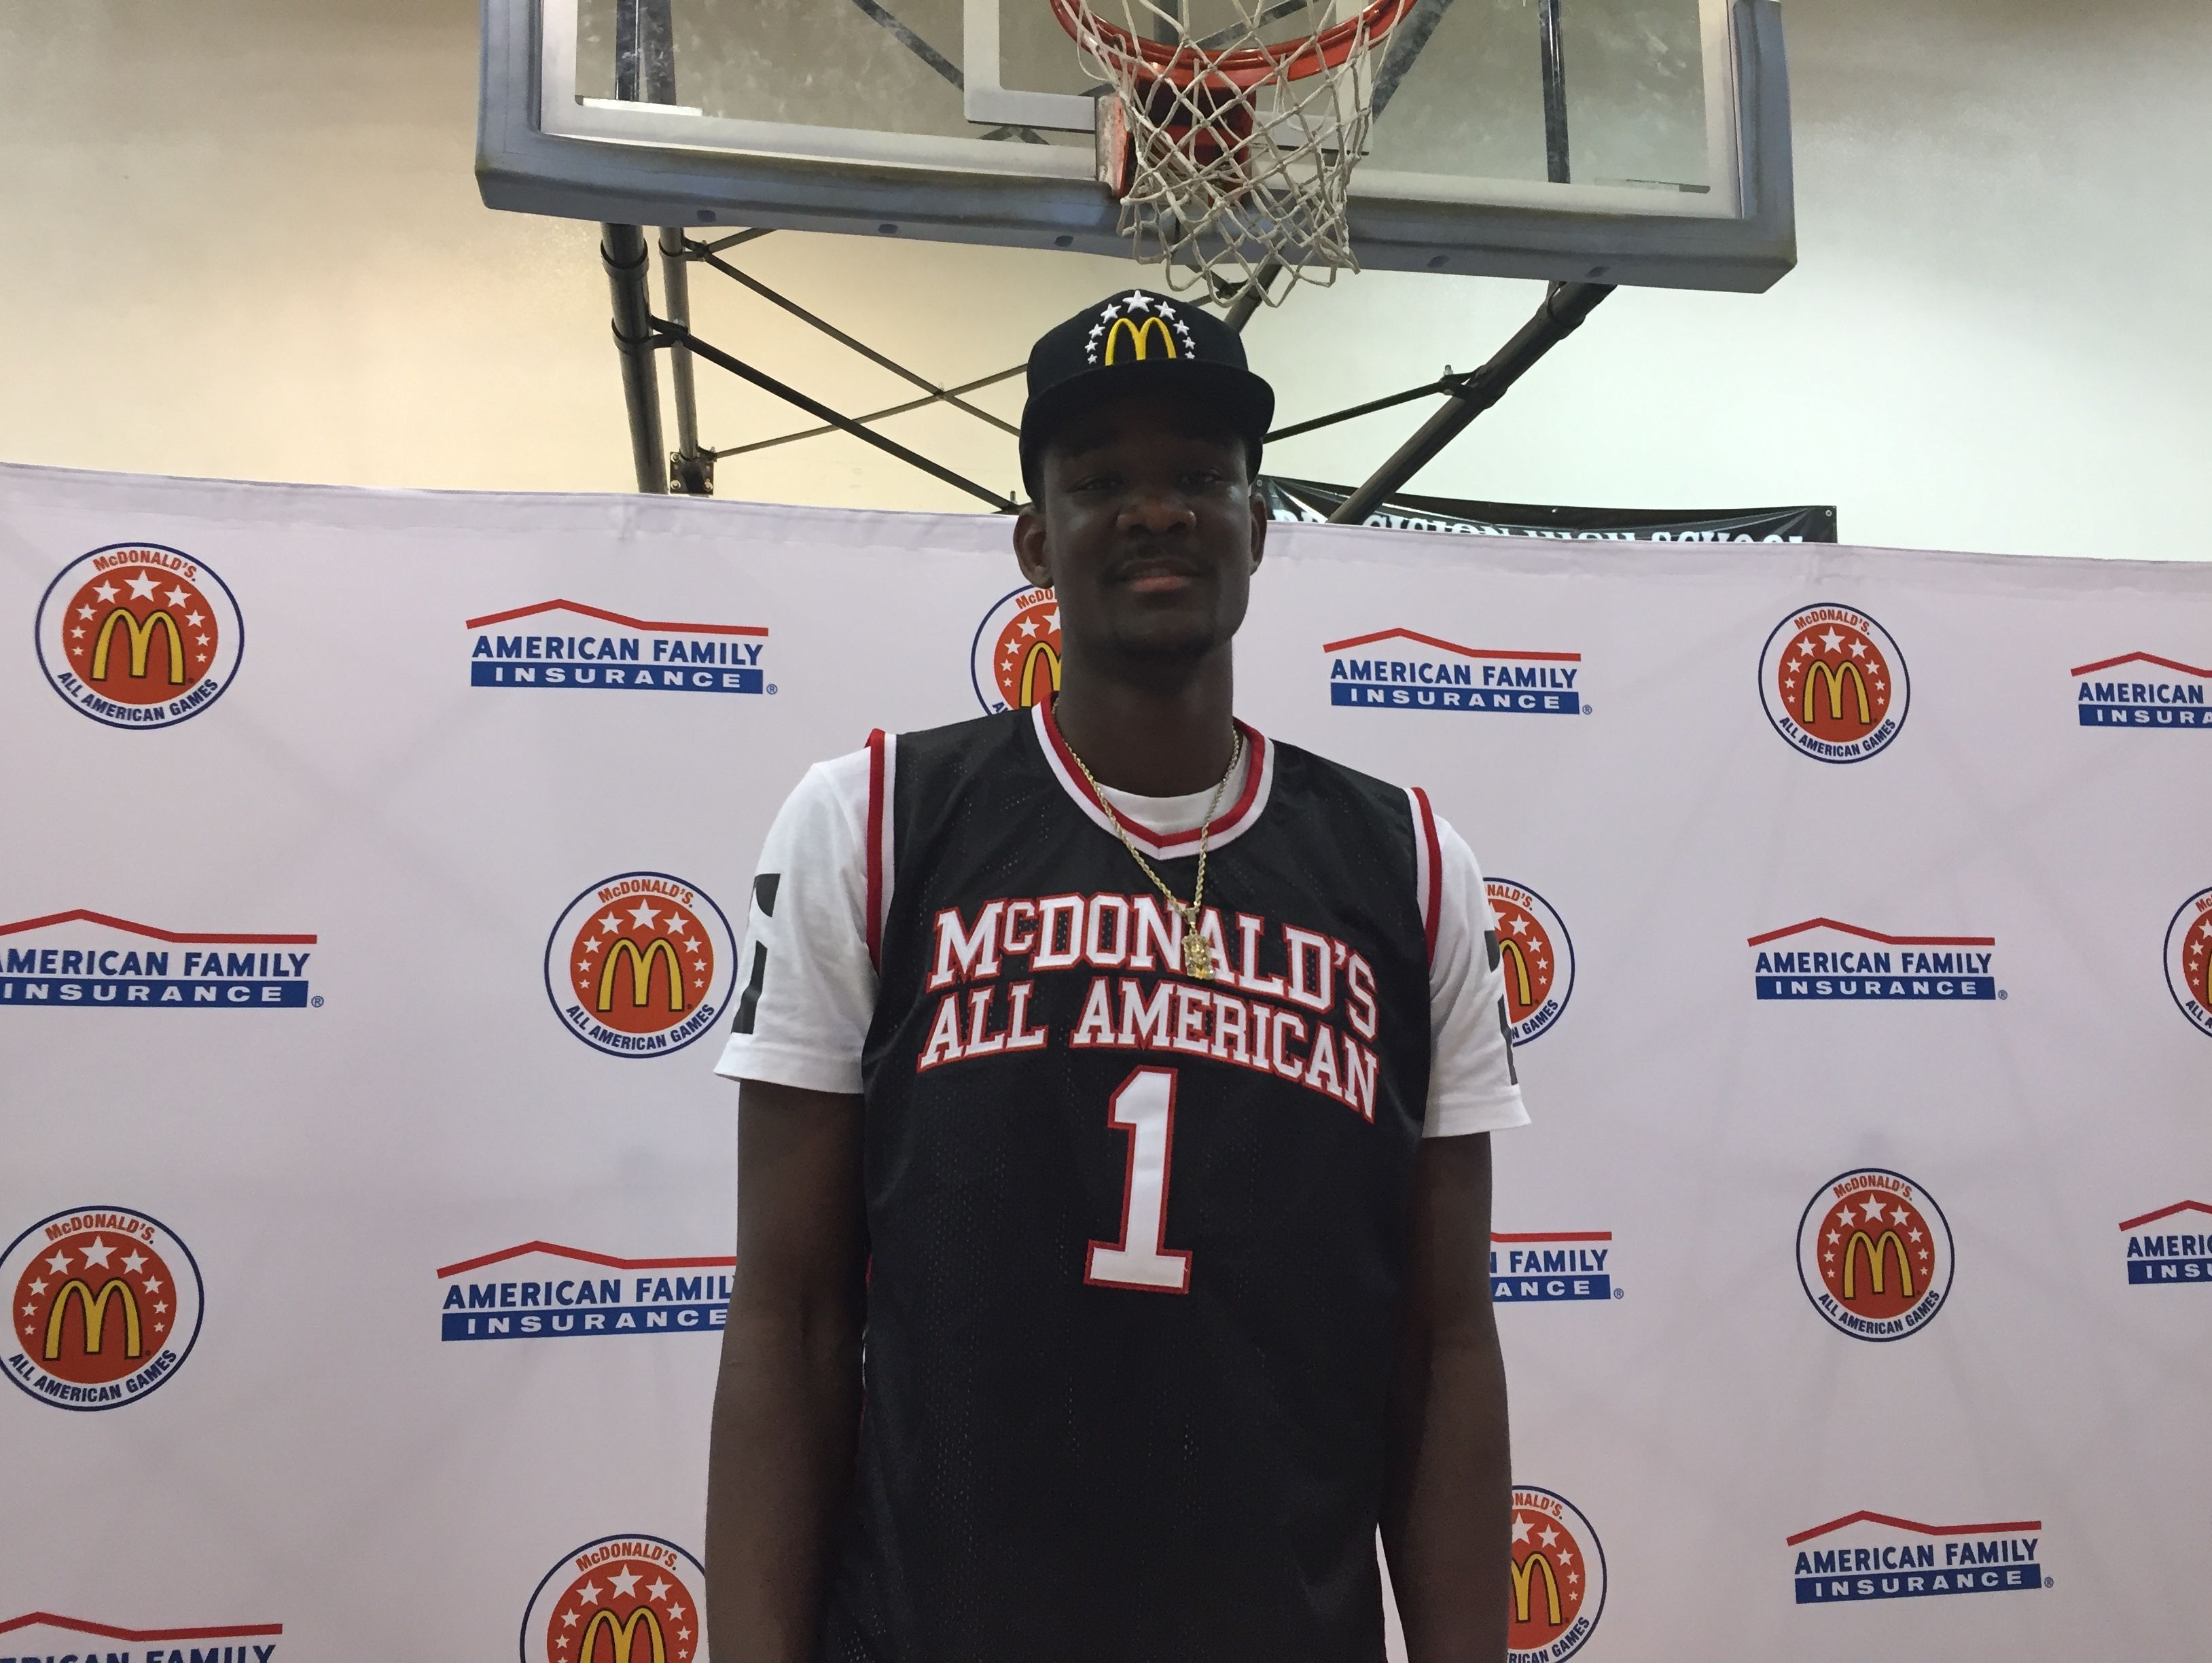 DeAndre Ayton became the first basketball player from Arizona to become a McDonald's All-American since 2007